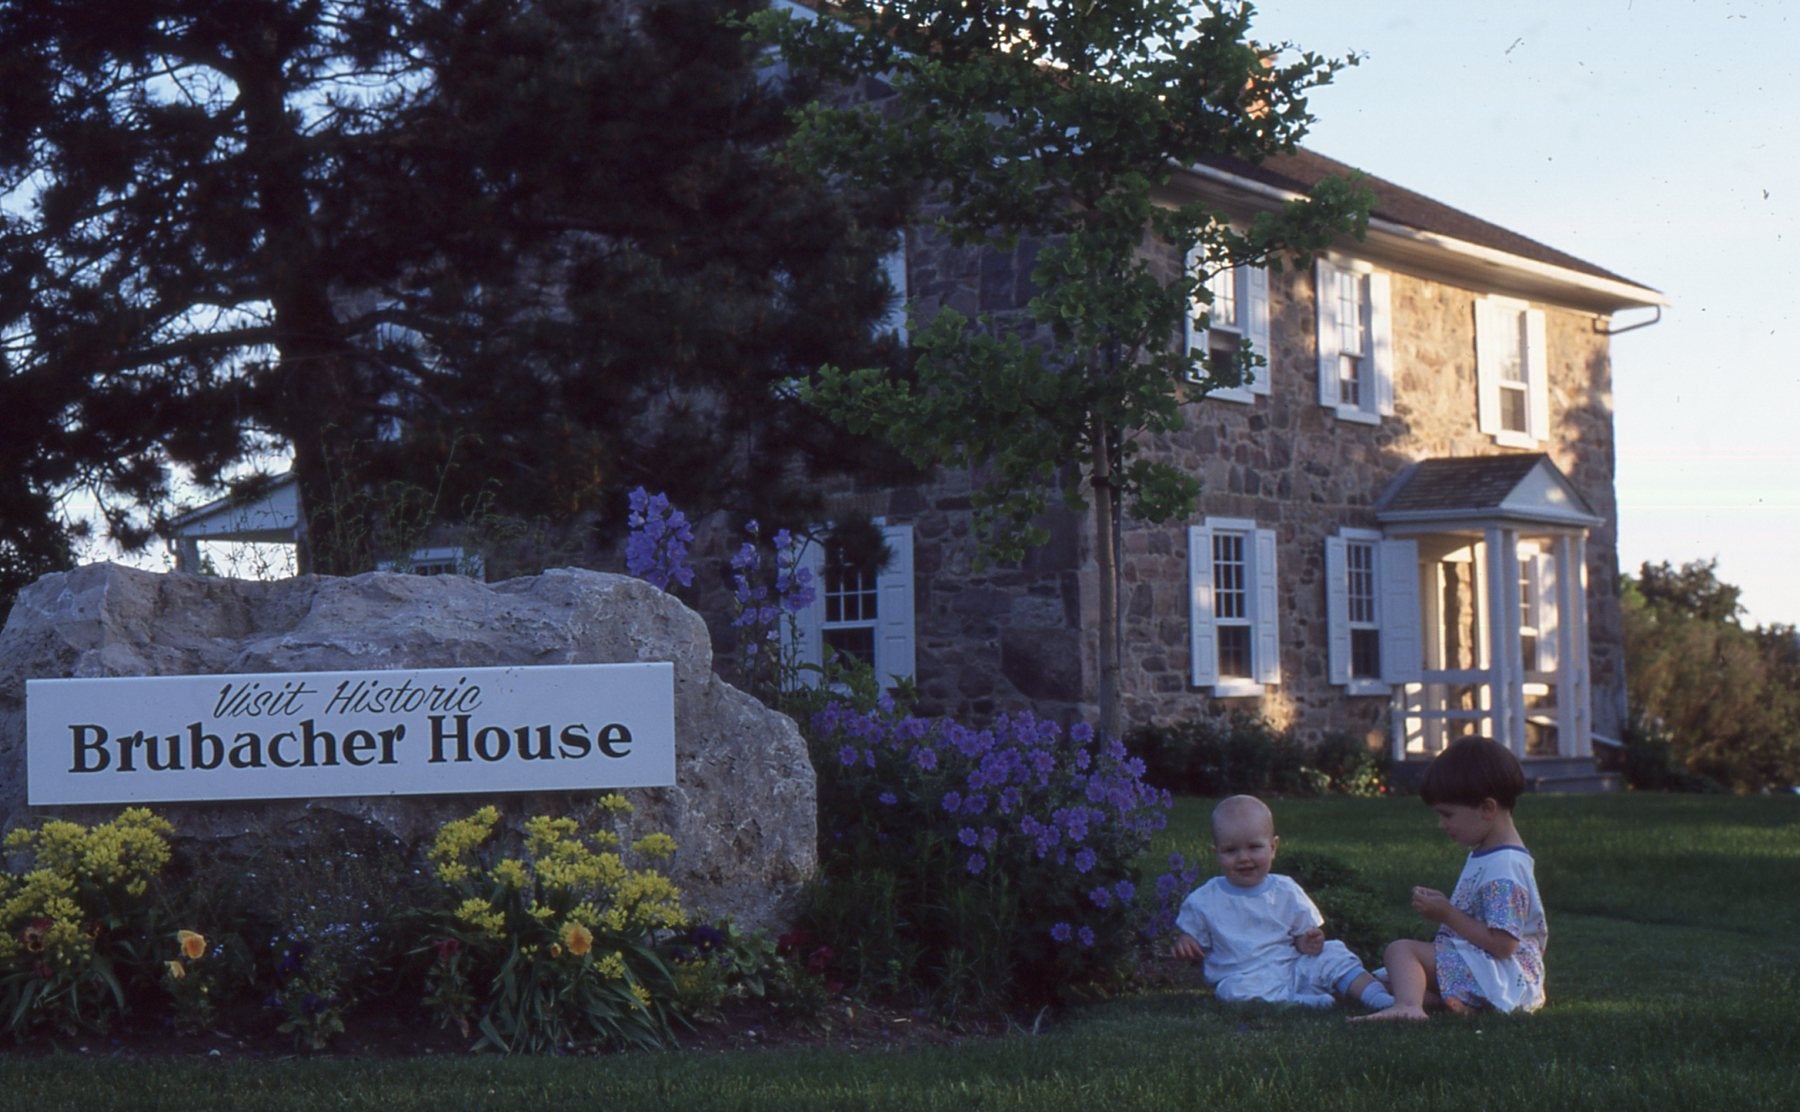 Two small children sit in the grass outside Brubacher House, beside the rock sign with flowers